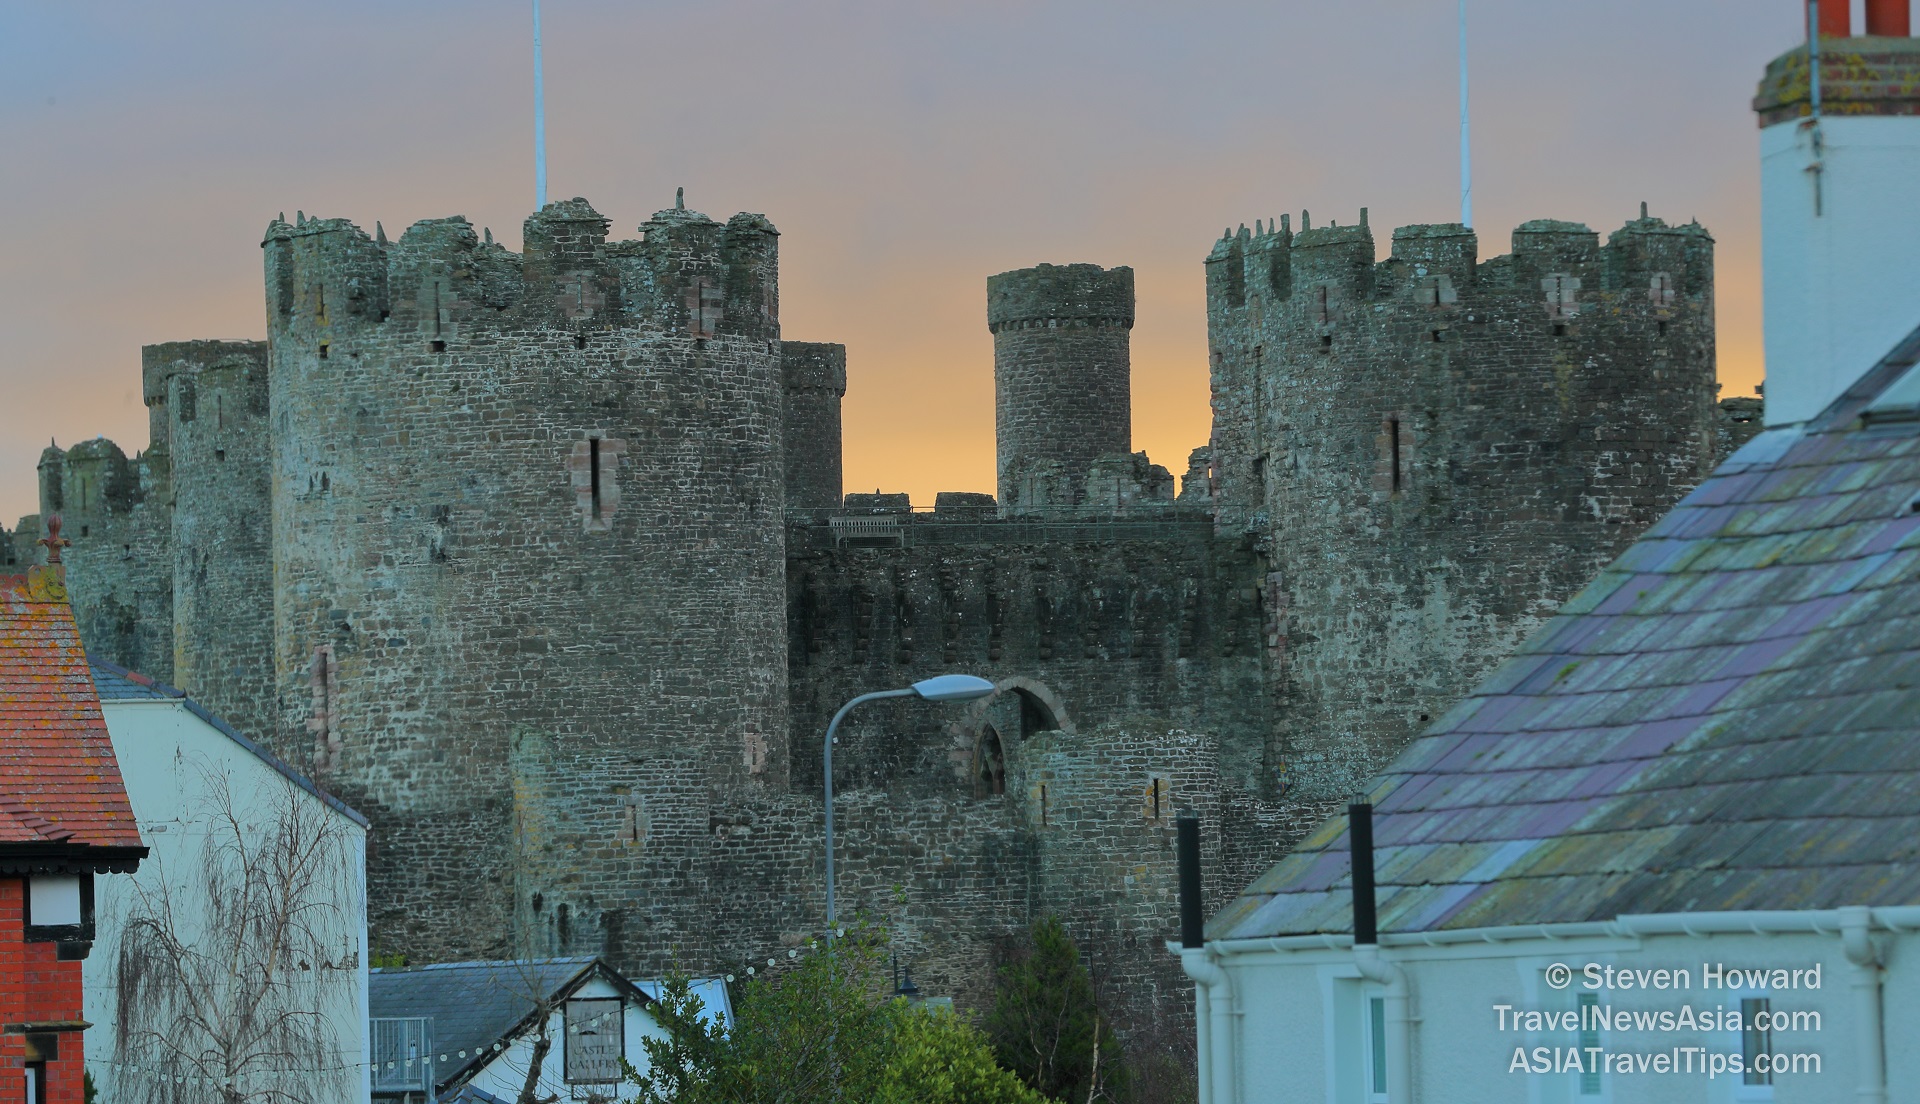 Conwy in north Wales is home to an awe inspiring castle that was built in the 13th century. Picture by Steven Howard of TravelNewsAsia.com Click to enlarge.